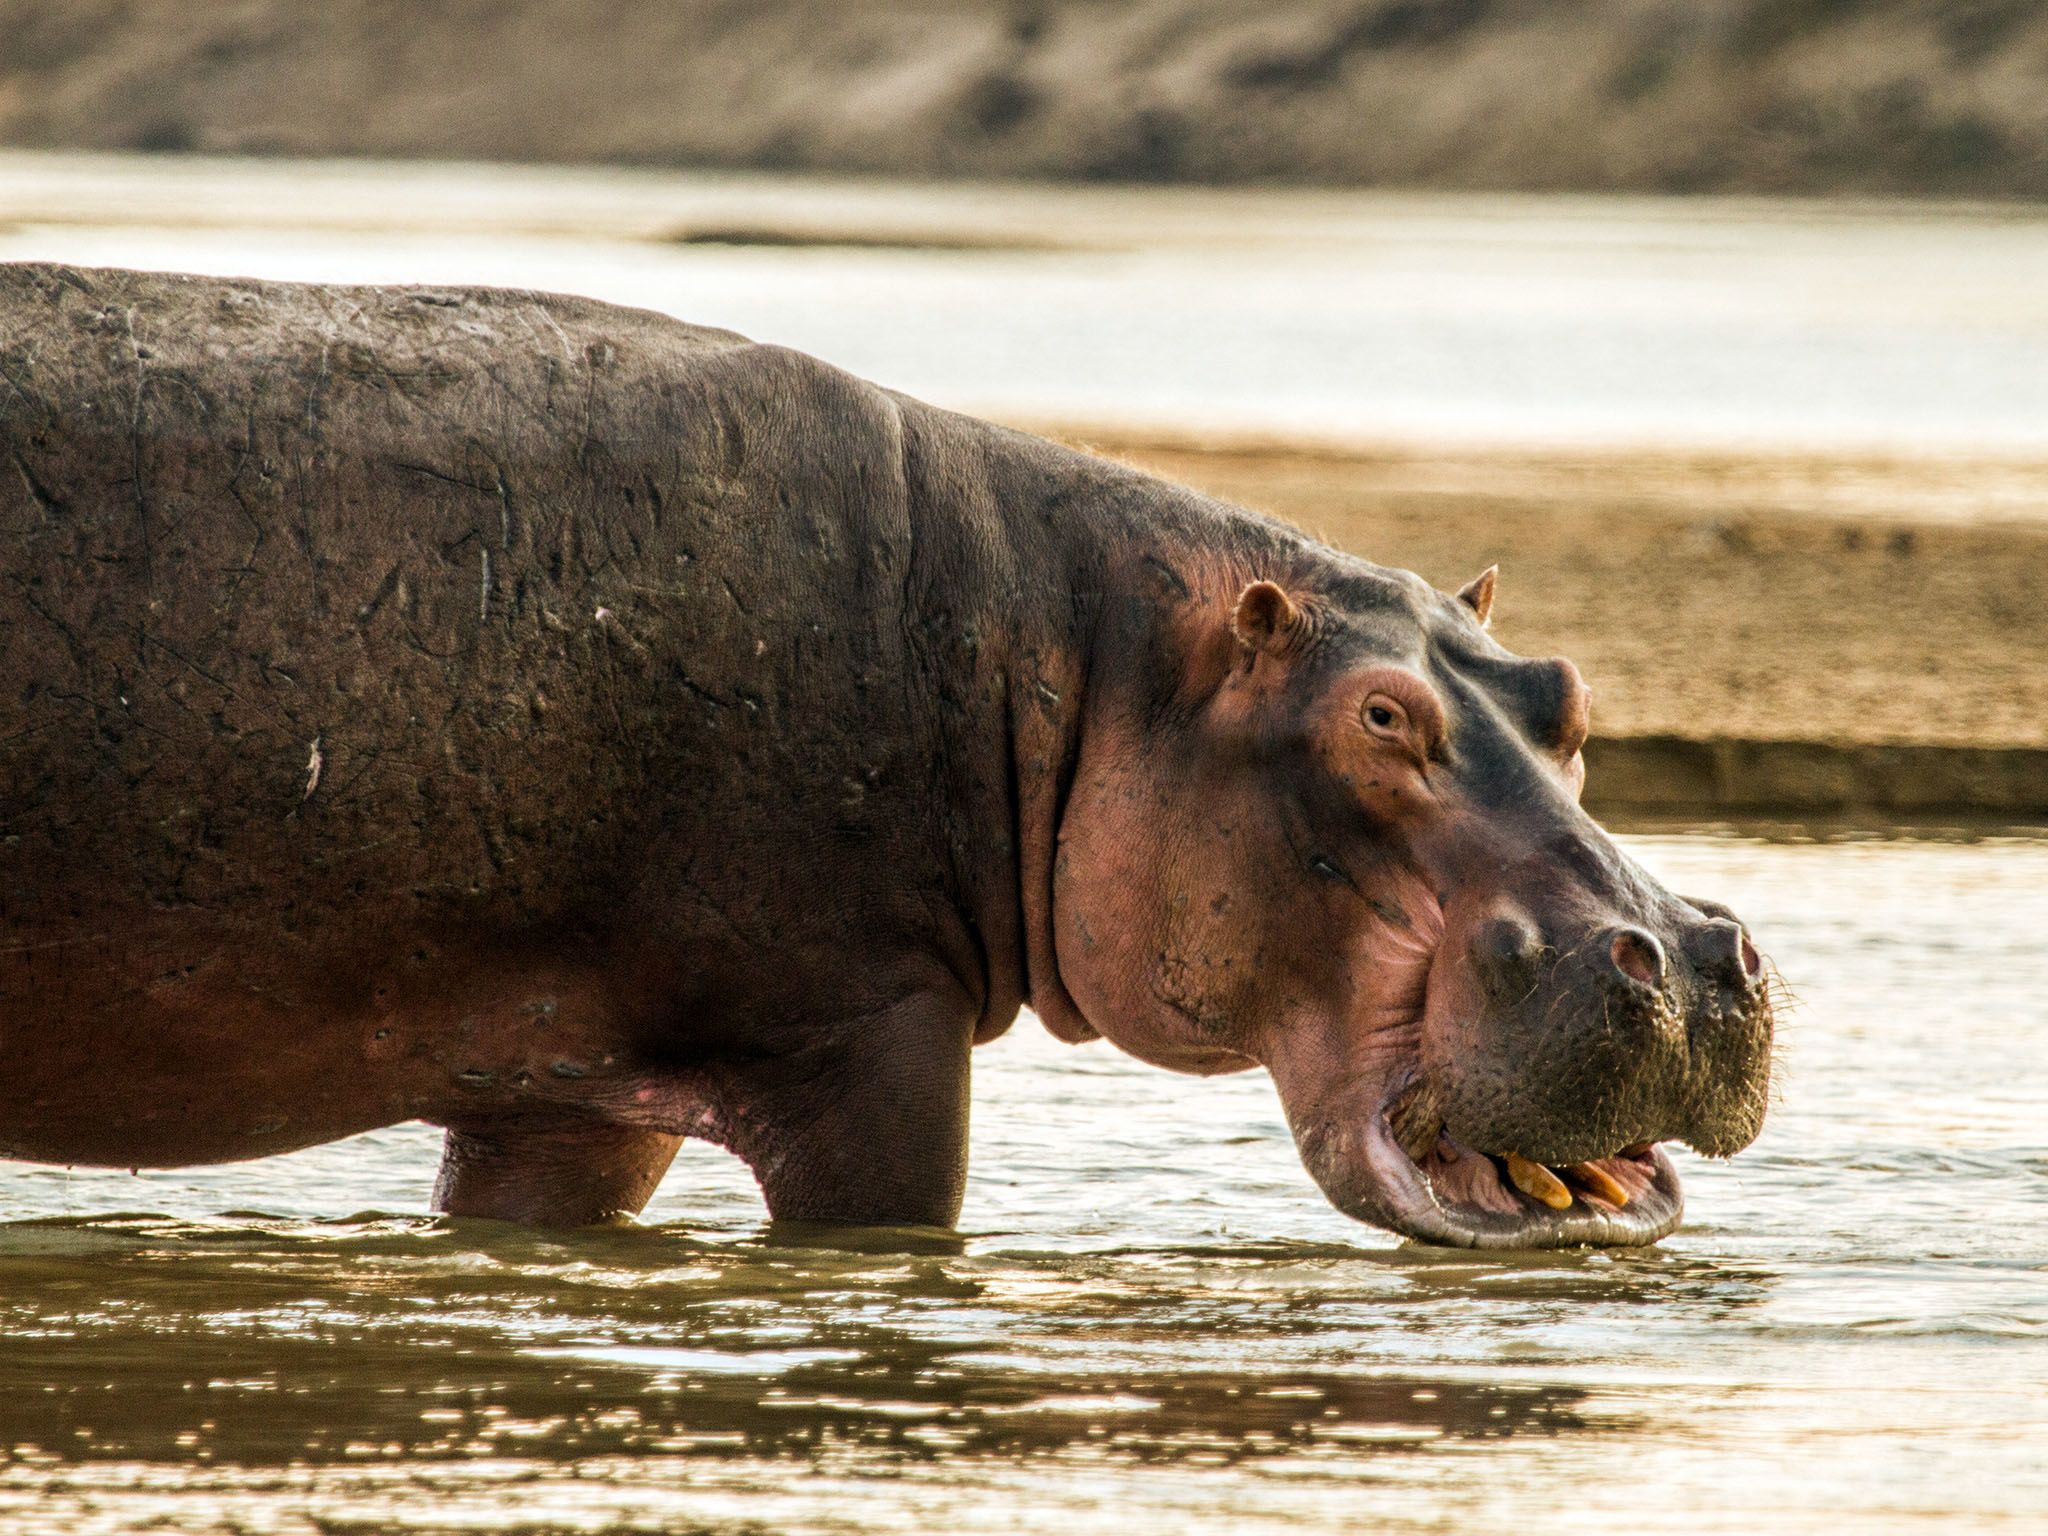 Bull hippo wading through shallow river, revealing numerous fighting scars. Dominant bulls must... [Photo of the day - May 2016]